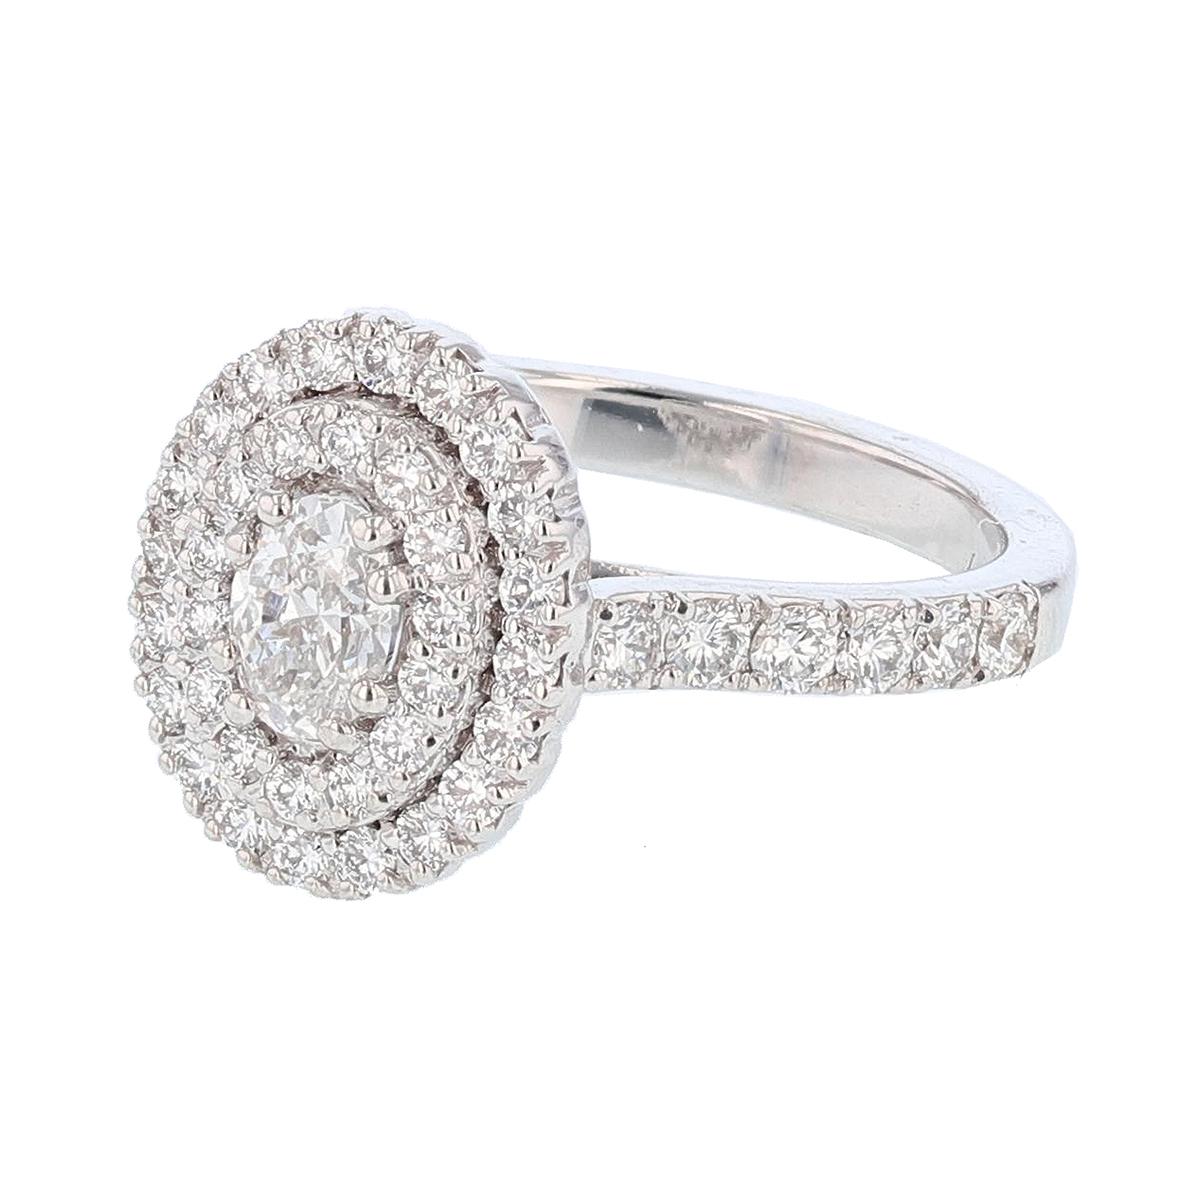 This ring is made with 14 karat white gold and features a prong set  0.46ct  IGI certified oval cut diamond (IGI Certificate number: 5813511), with a color grade (D) and clarity grade (VS2) and is surrounded by 49 round cut diamonds weighing 0.91ct